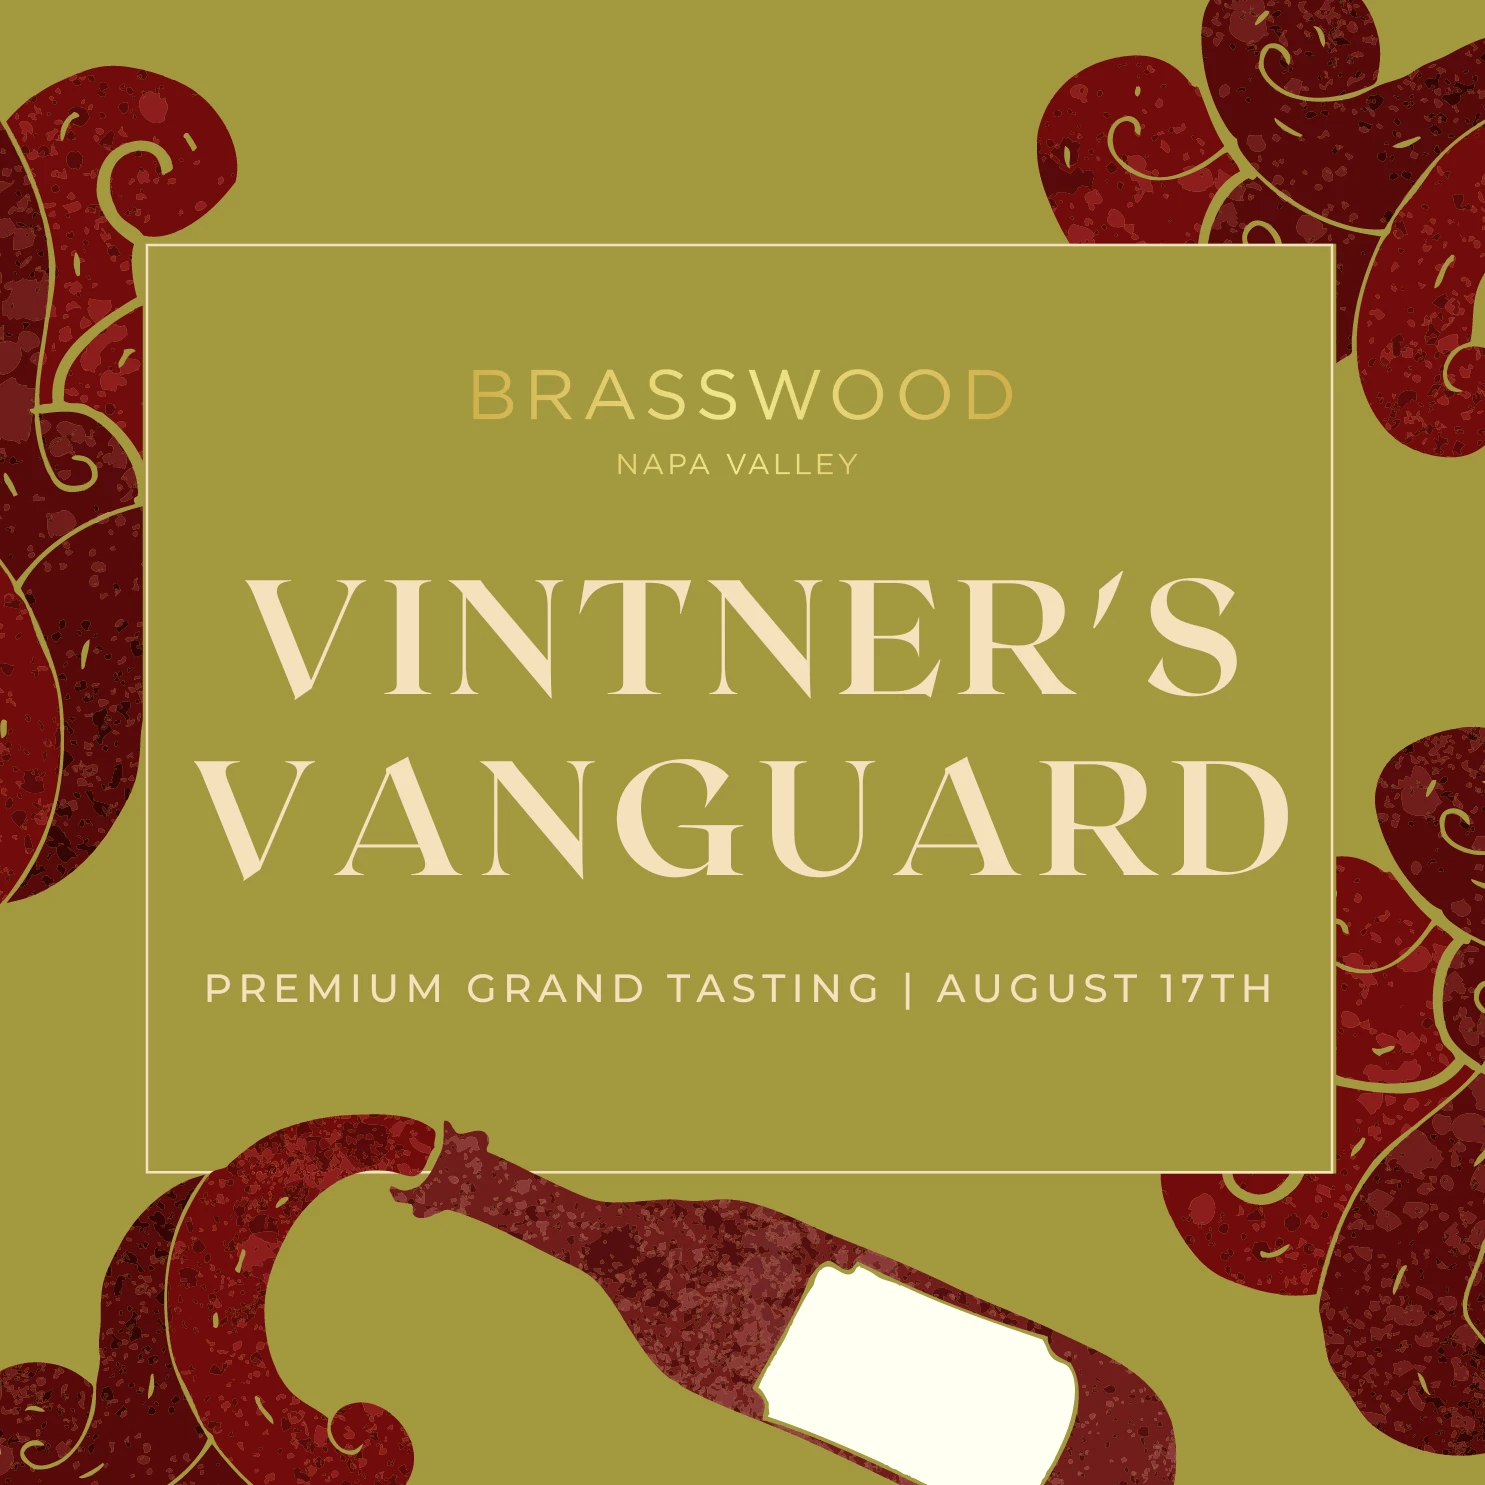 Vintner's Vanguard 2024 promotional image; featuring an illustraation of a red bottle of wine, with red wine pouring out along the edges, against an olive-green background, with copy that says, "Brasswood Napa Valley, Vintner's Vanguard, Premium Grand Tasting | August 17th, 2024"